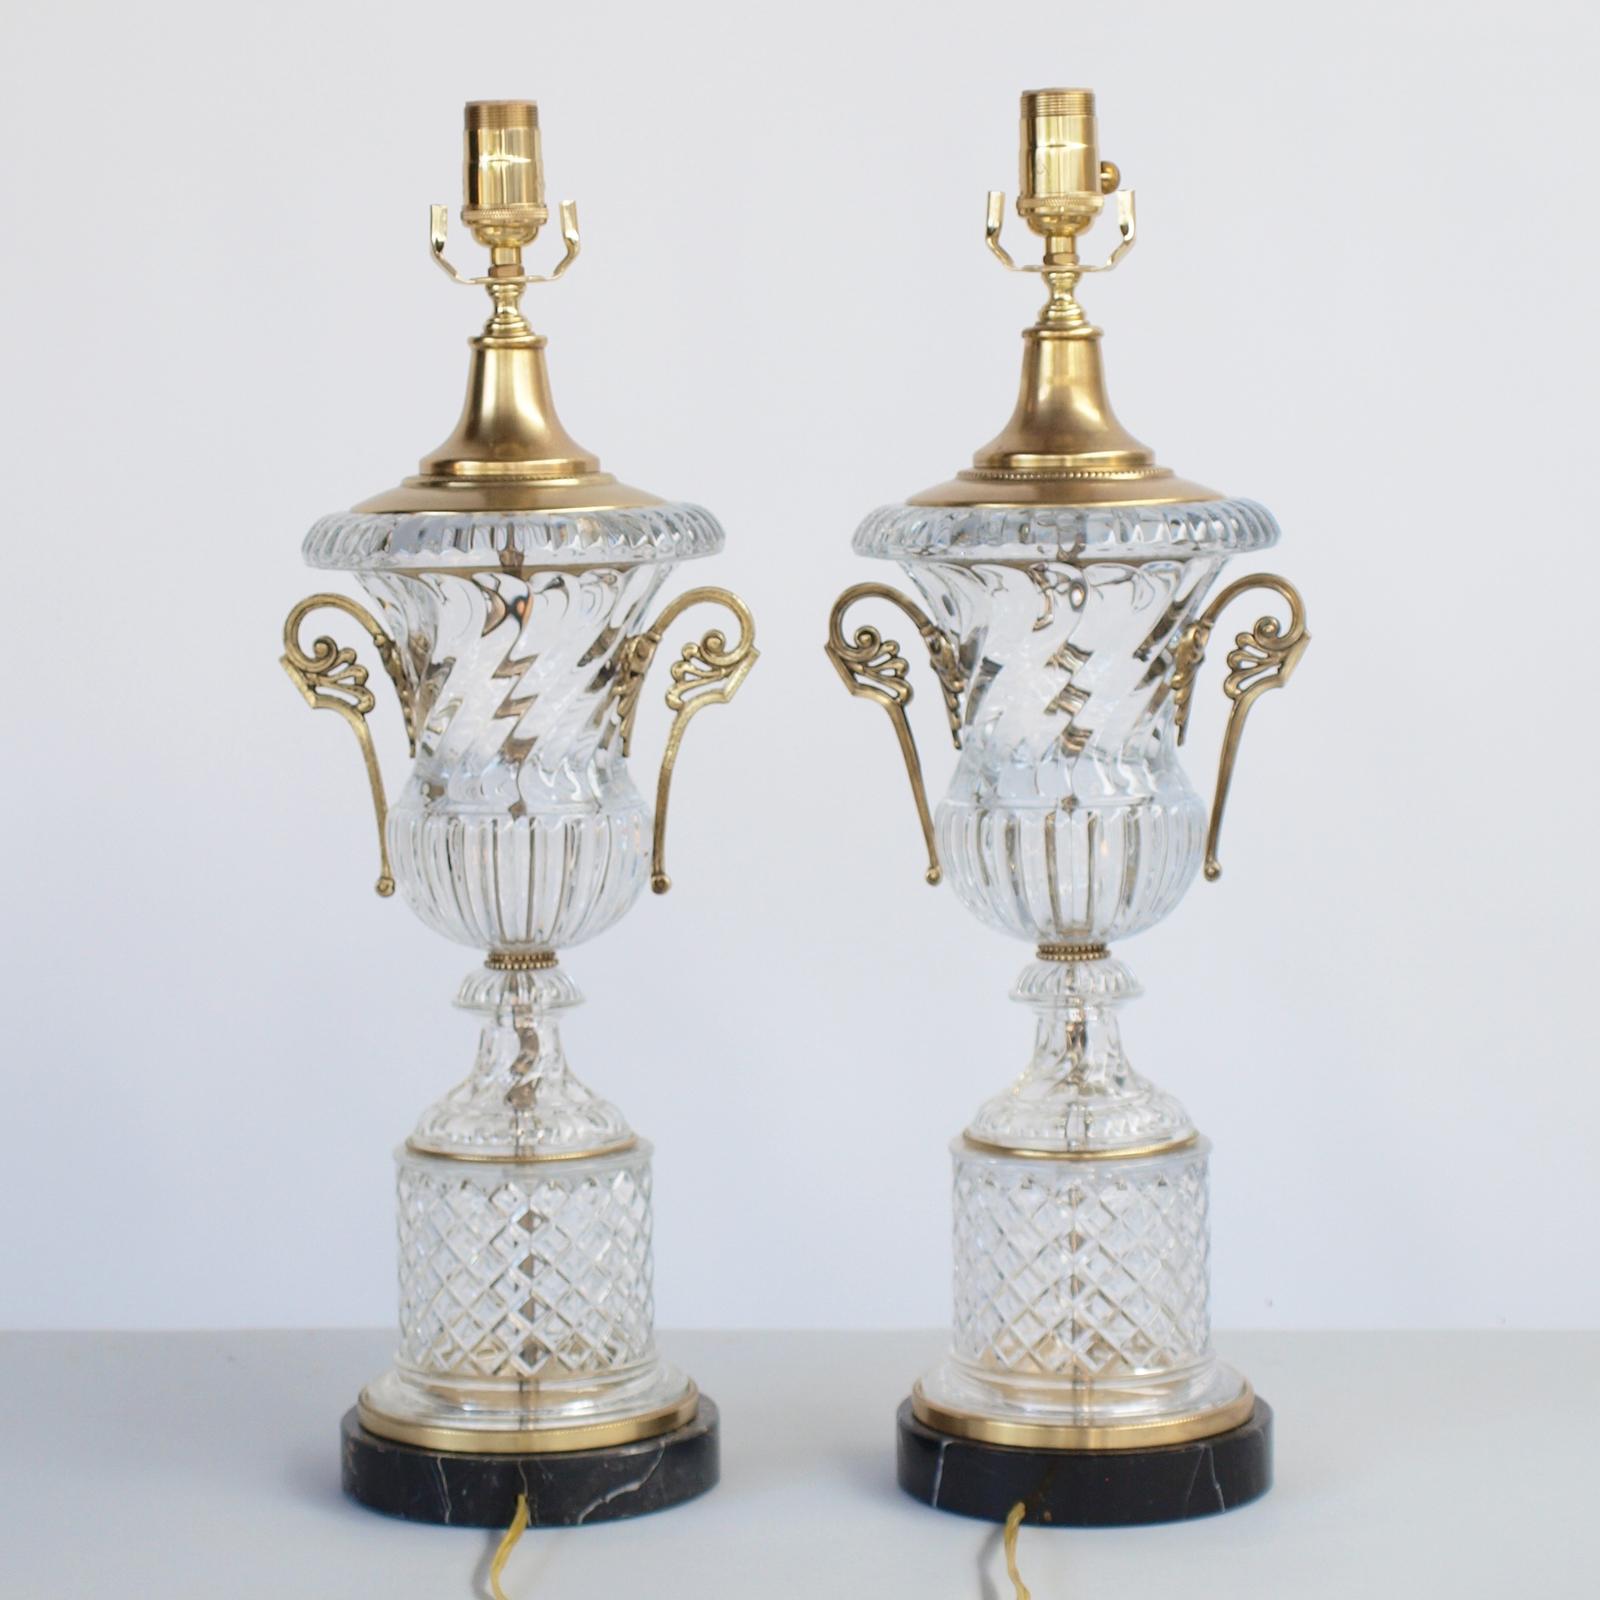 Fine pair of glass lamps, from the original Baccarat molds, by Paul Hanson; each a spiraling urn with gilt bronze scrolling handles, on round plinth cut in diamond pattern, on a base of black marble.  Shown with pleated silk shades (not